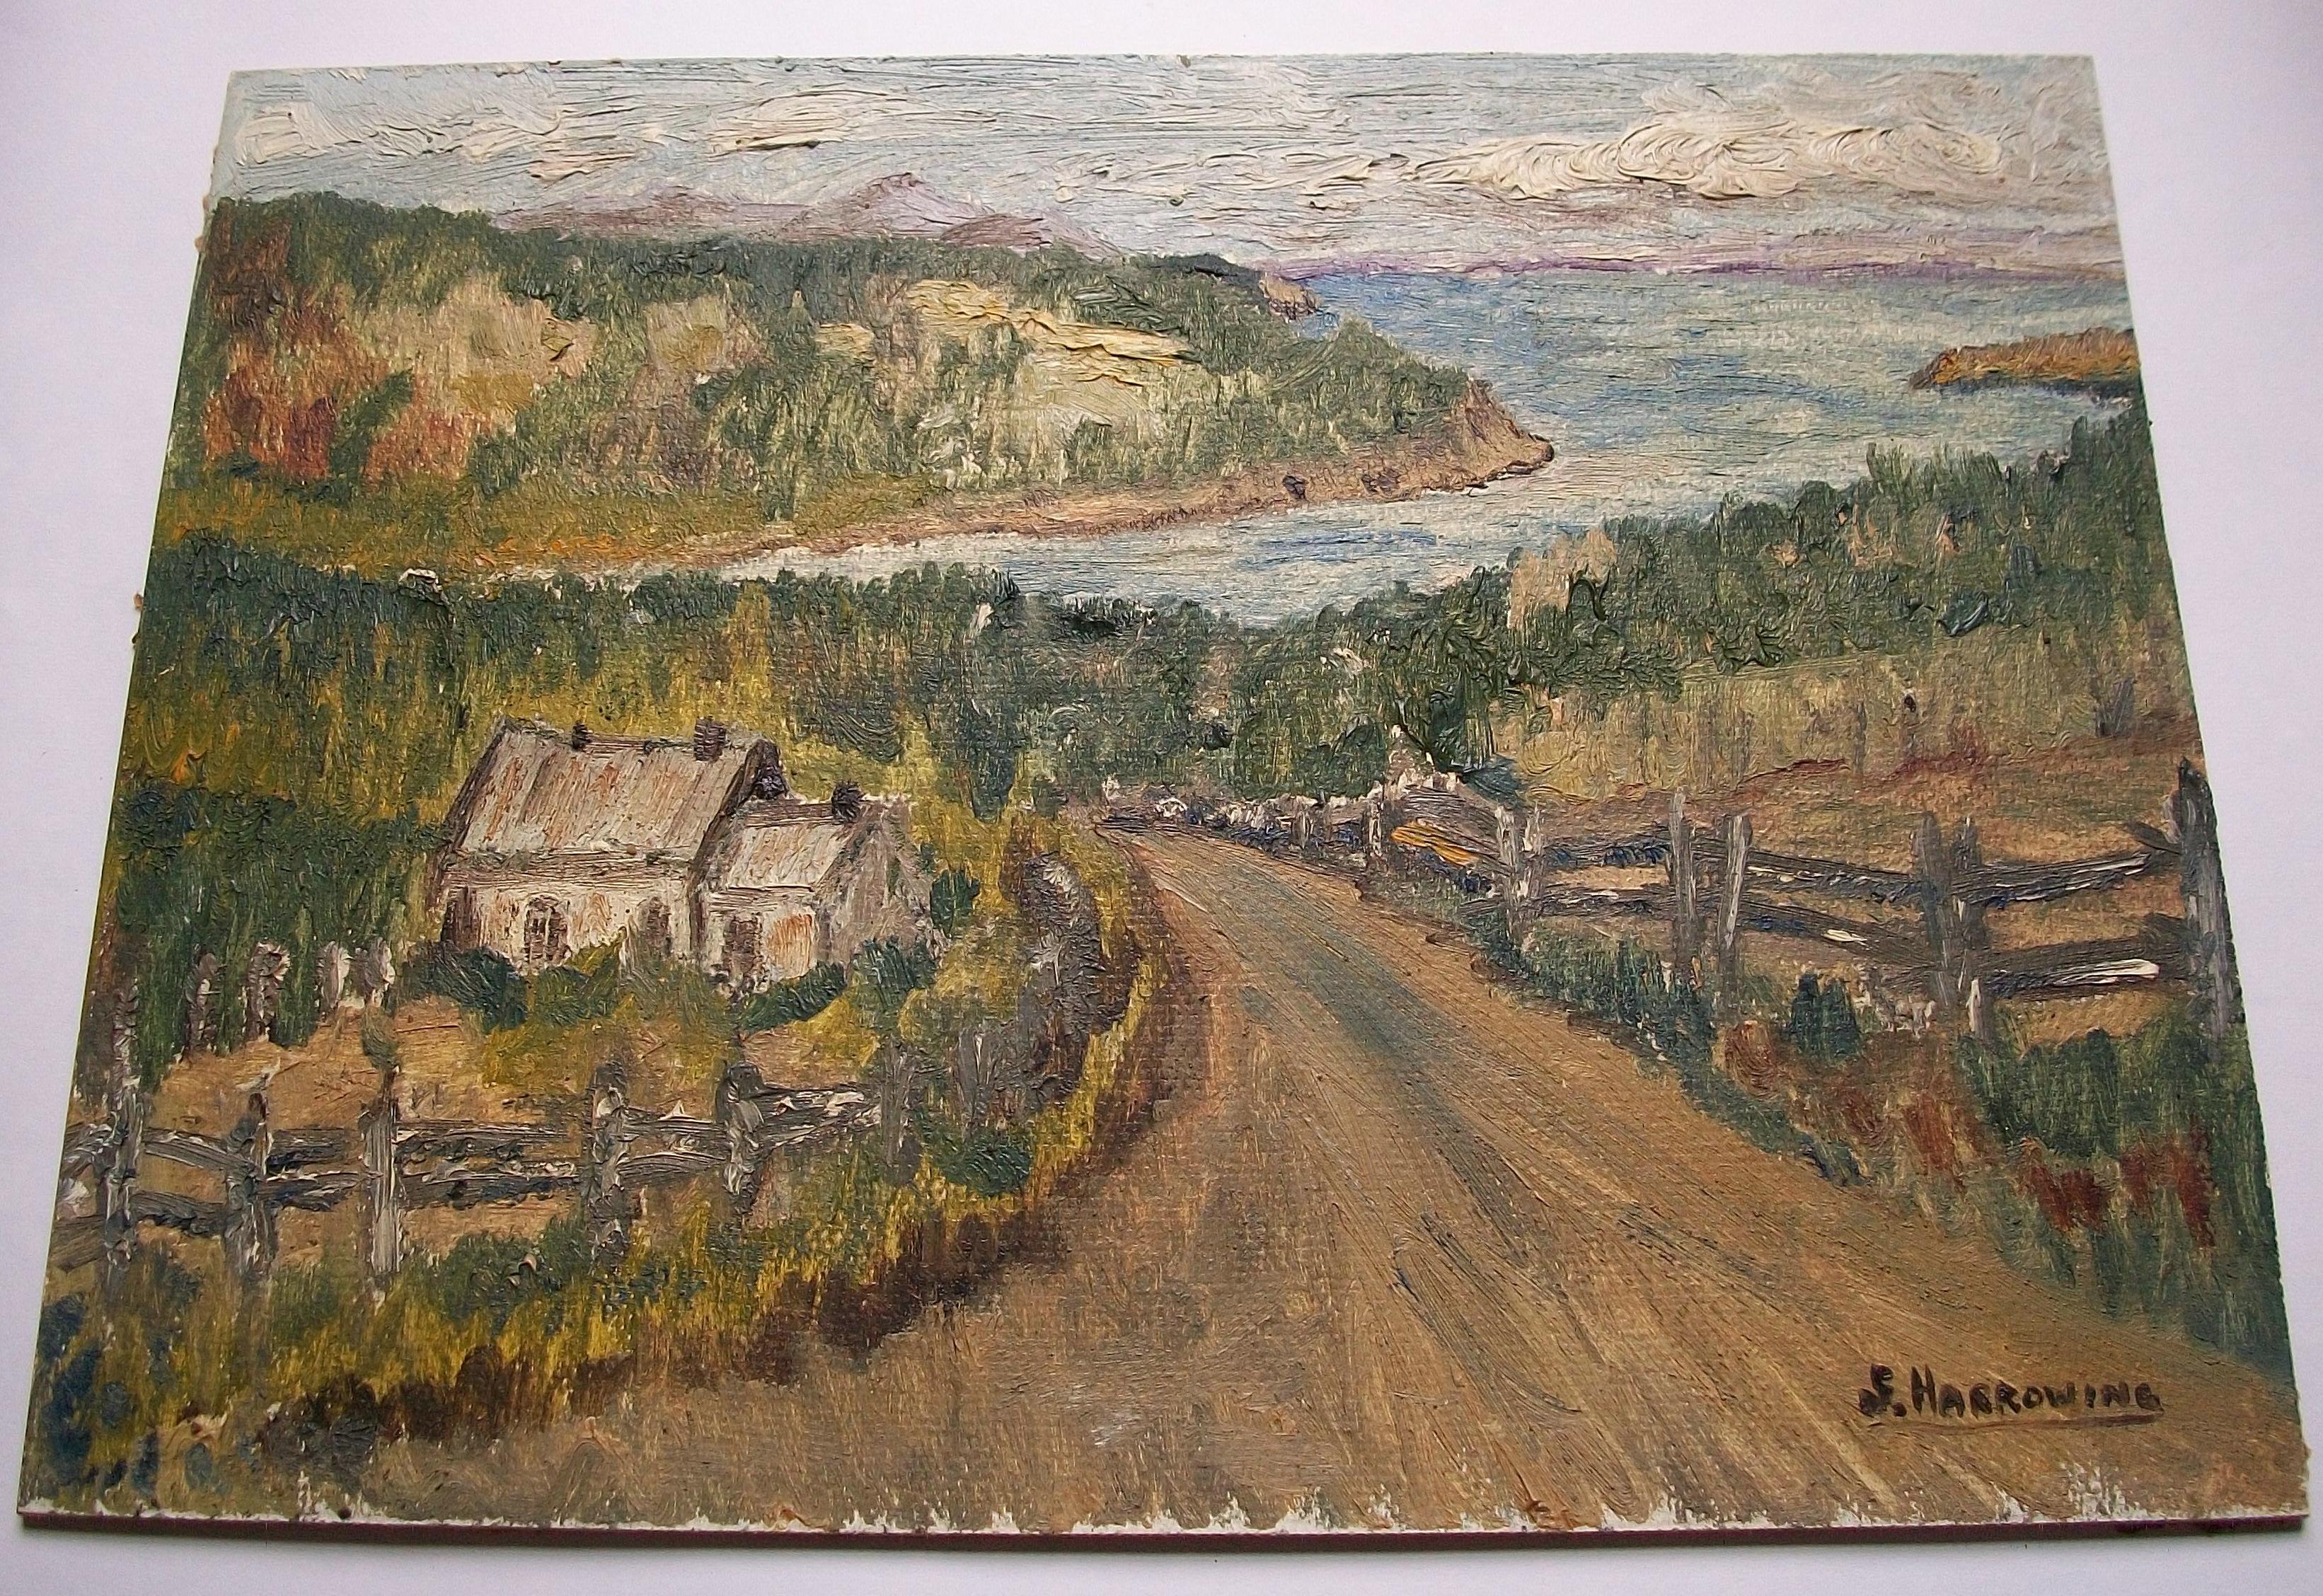 Hand-Painted S. HARROWING - 'Baie St. Paul, Que.' - Landscape Oil Painting - Canada - C. 1962 For Sale